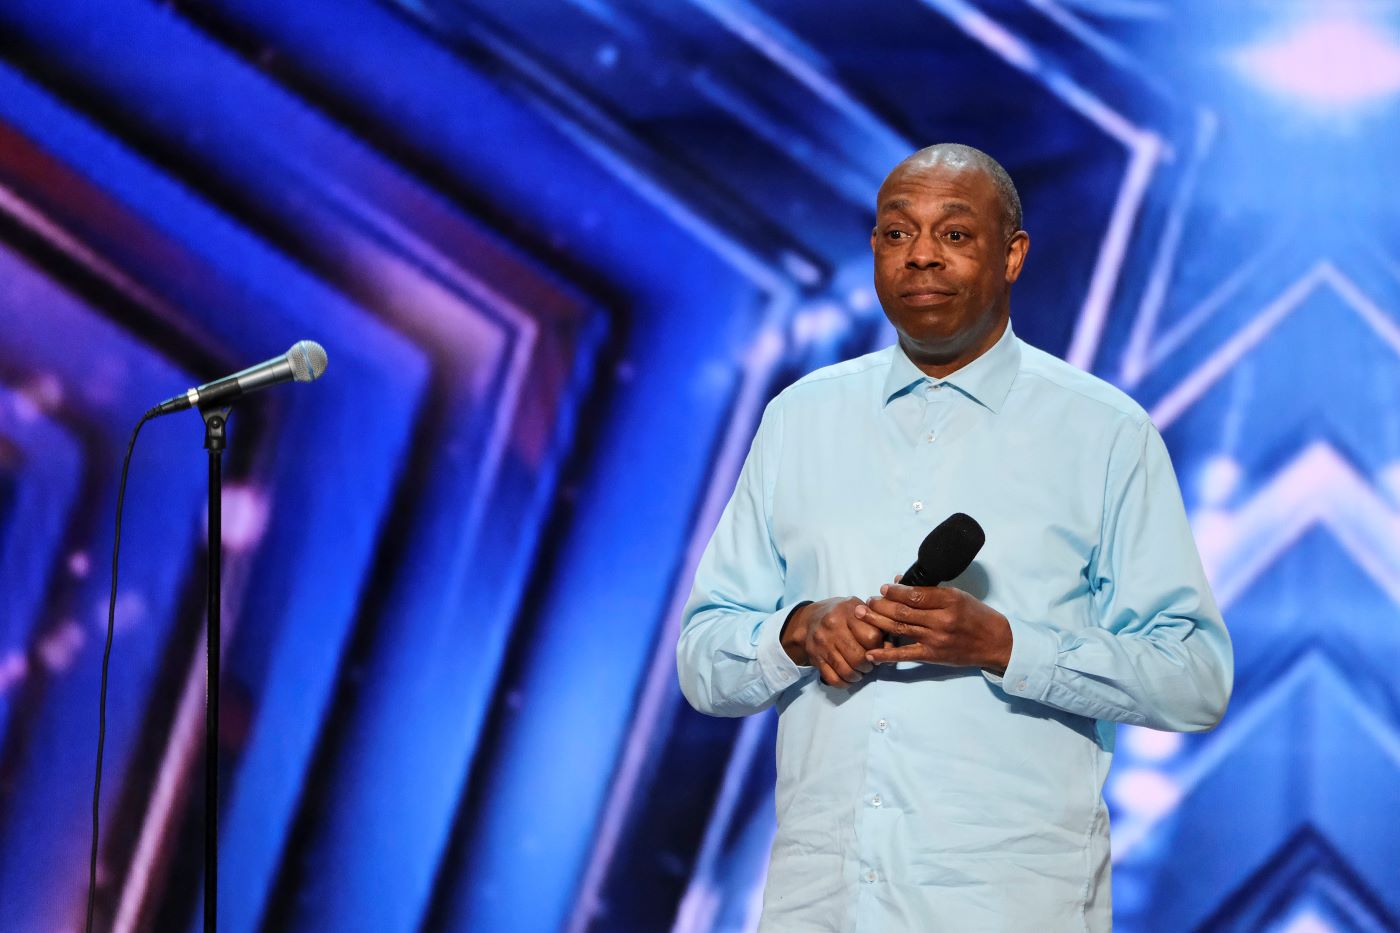 Michael Winslow is a sky blue button-up shirt holding a black microphone in front of a blue and purple textured background.